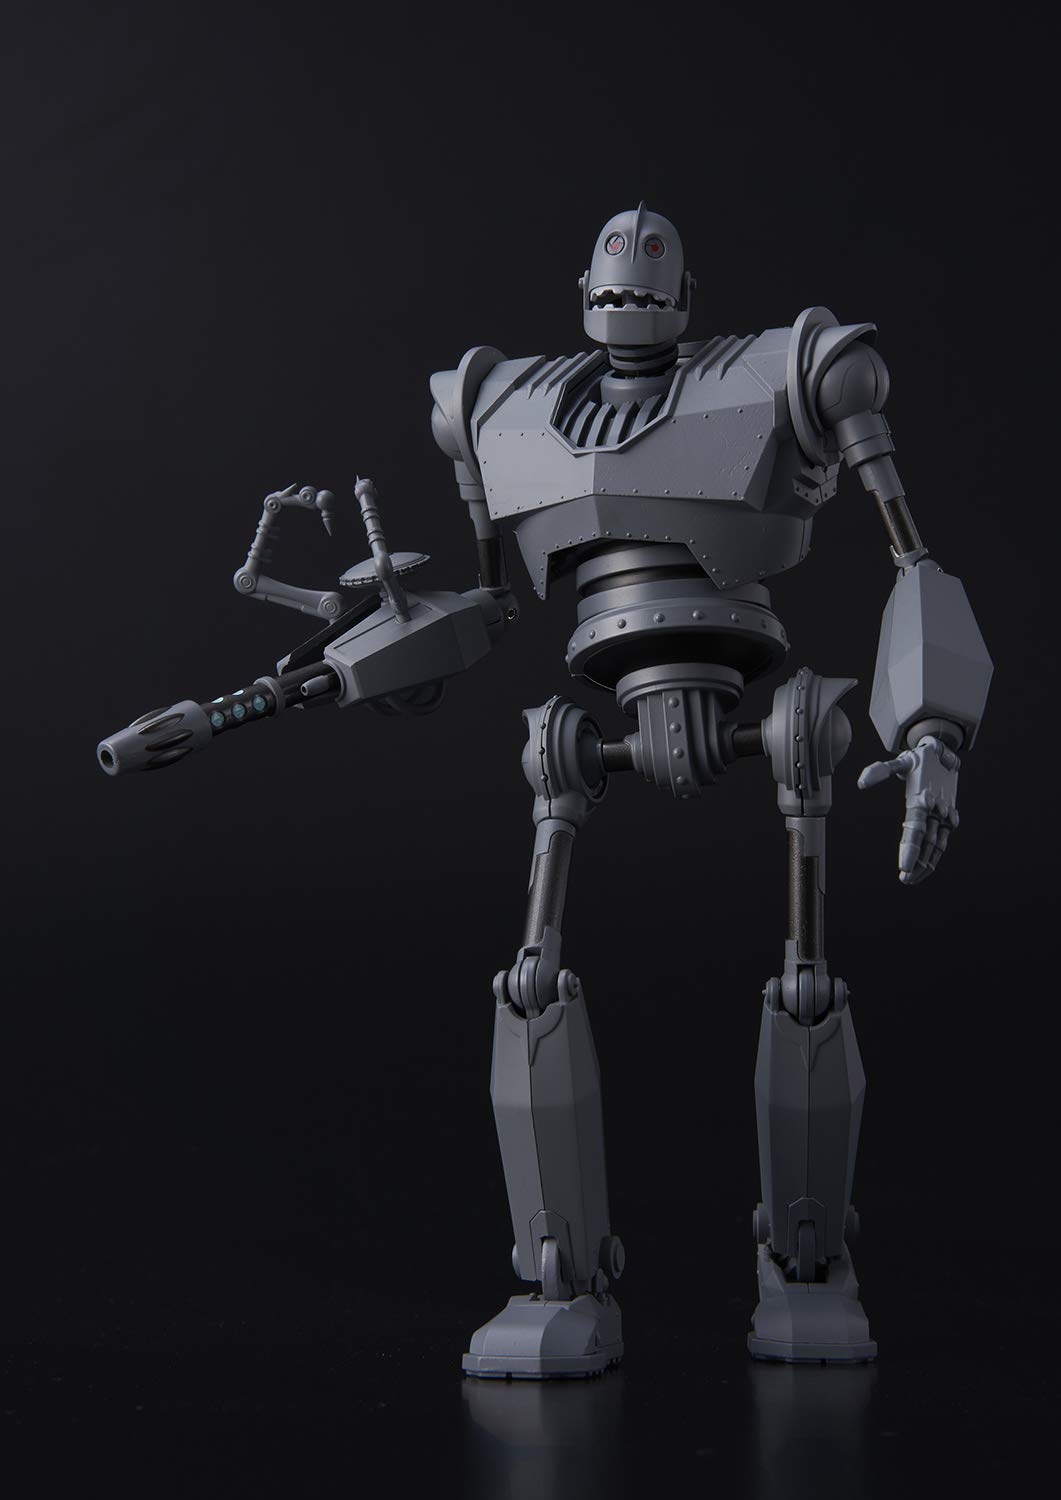 1000 Toys The Iron Giant (Battle Mode Version) 1: 12 Scale Action Figure